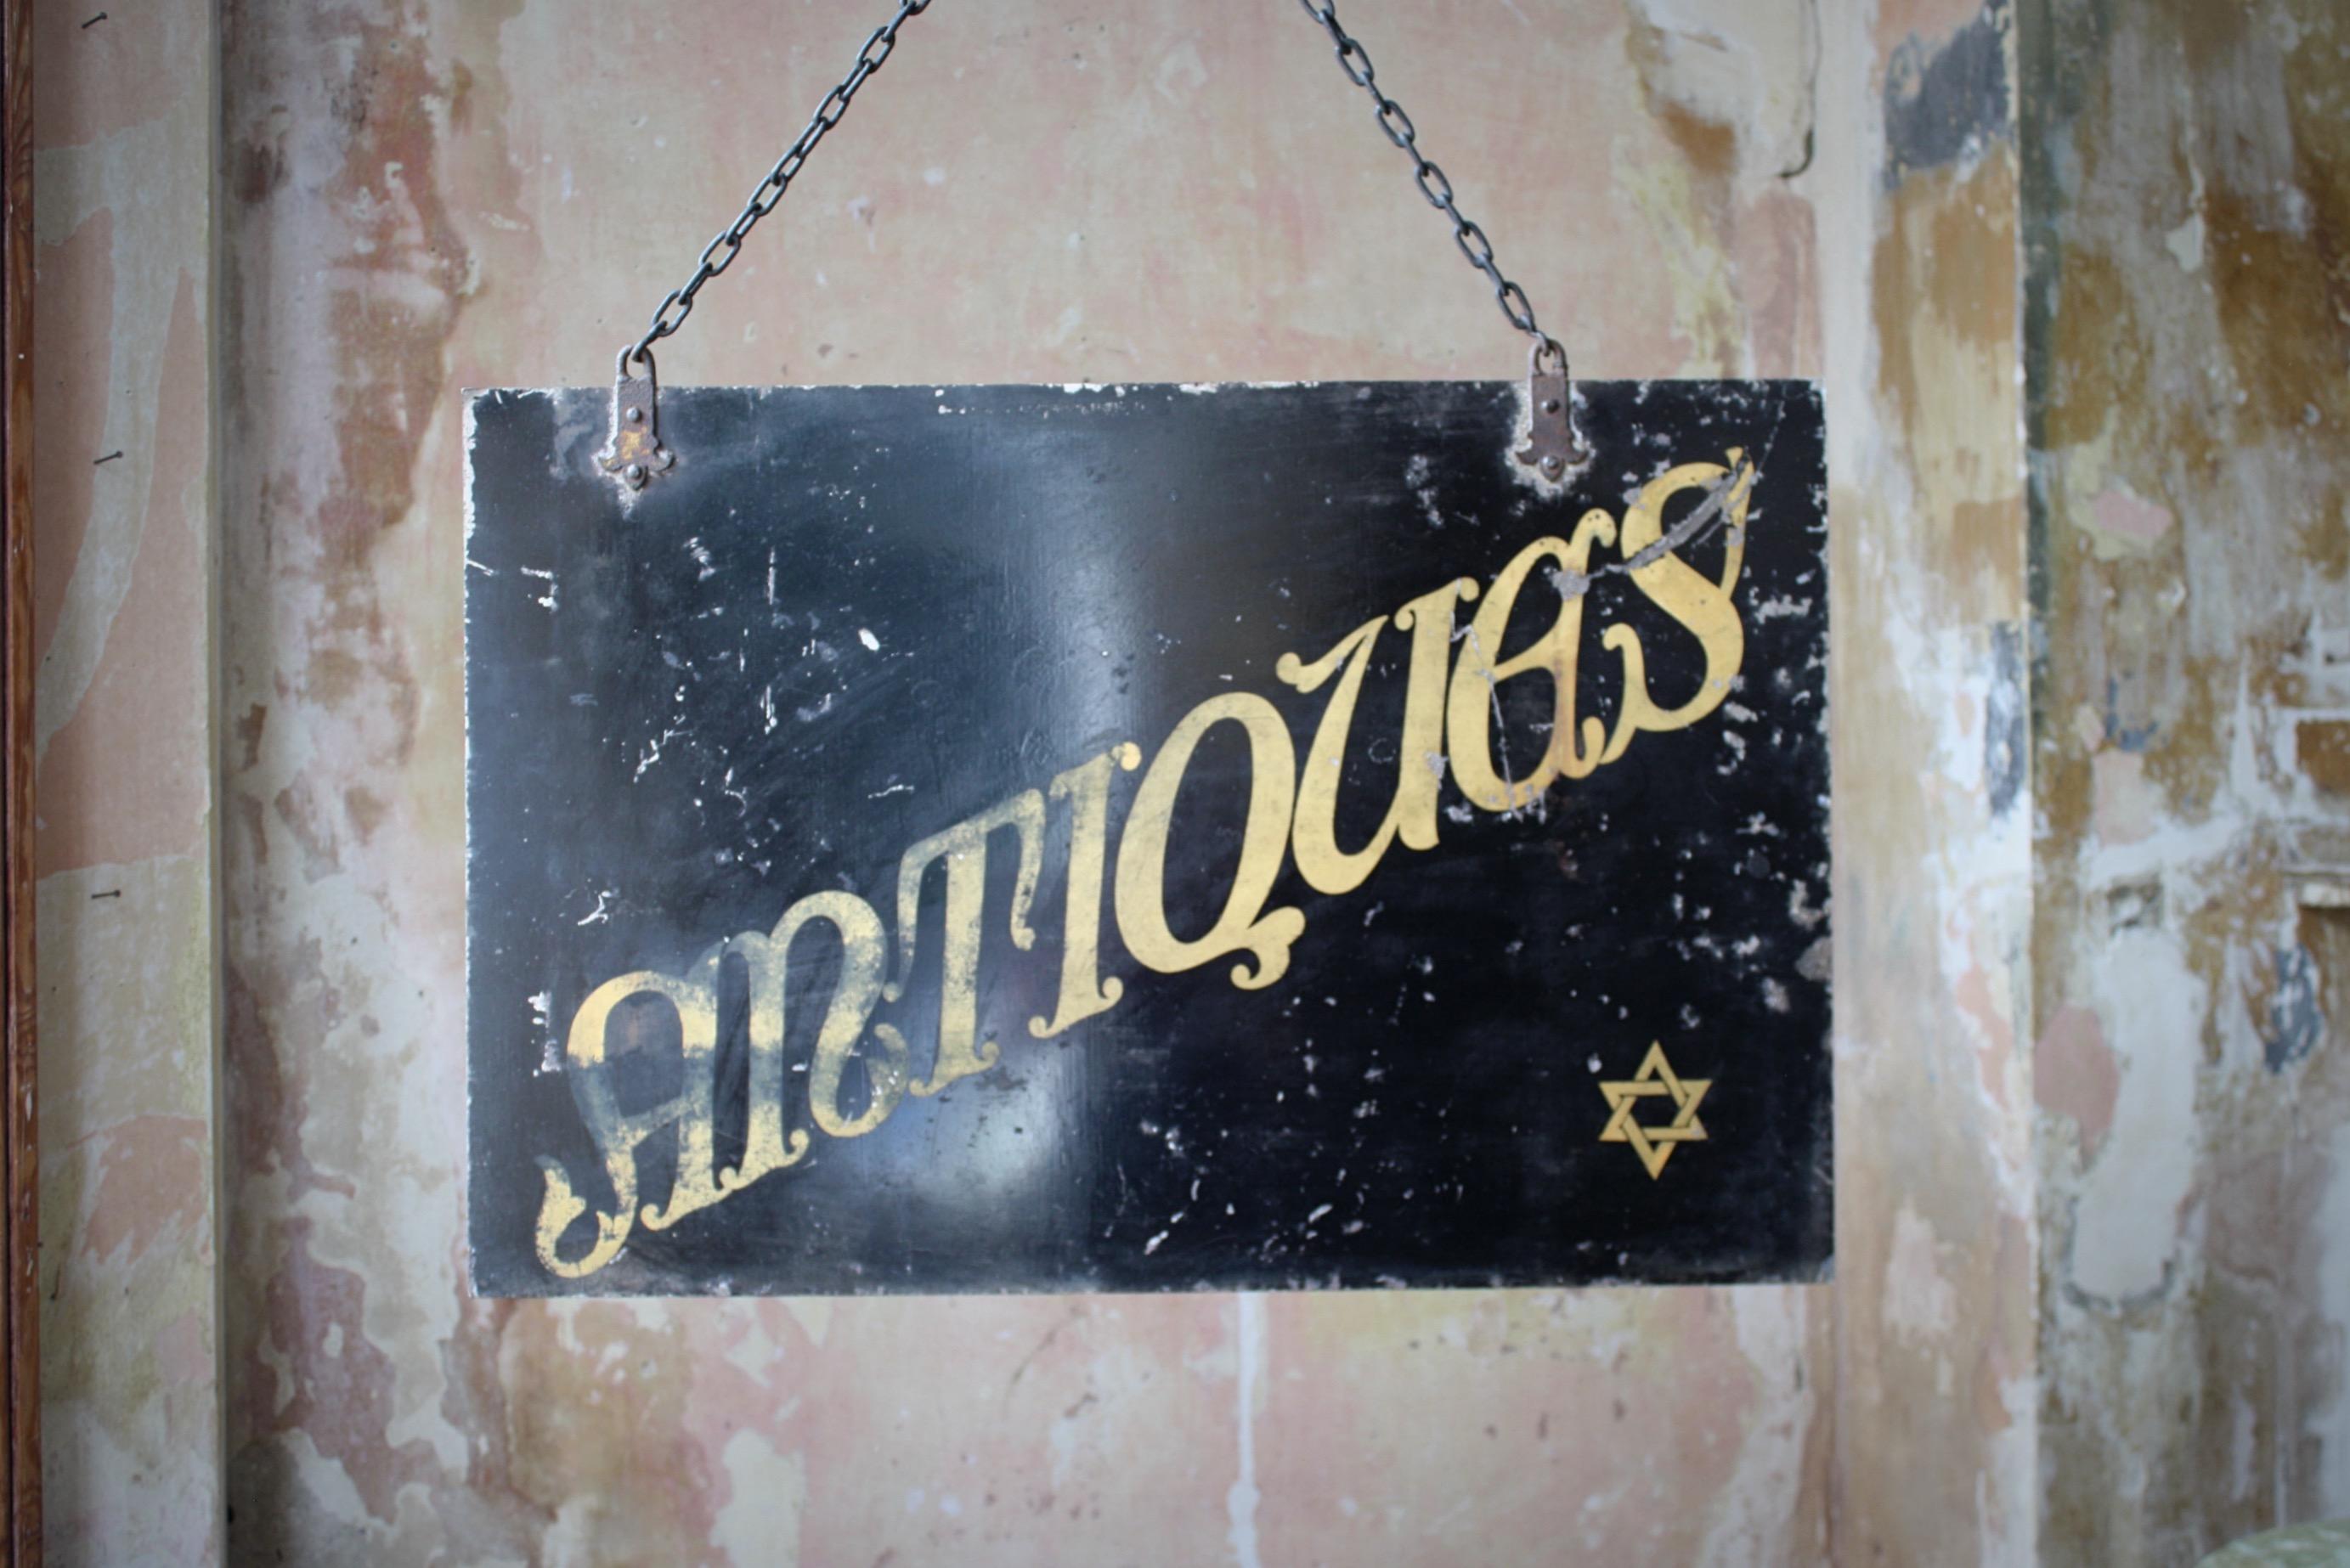 Hanging double sided trade sign, sheet metal with a black ground and gilt lettering. Two pretty cast iron riveted hanging brackets.

A small Star of Solomon is located in the corner of each side, giving the indiction it was previously used to trade